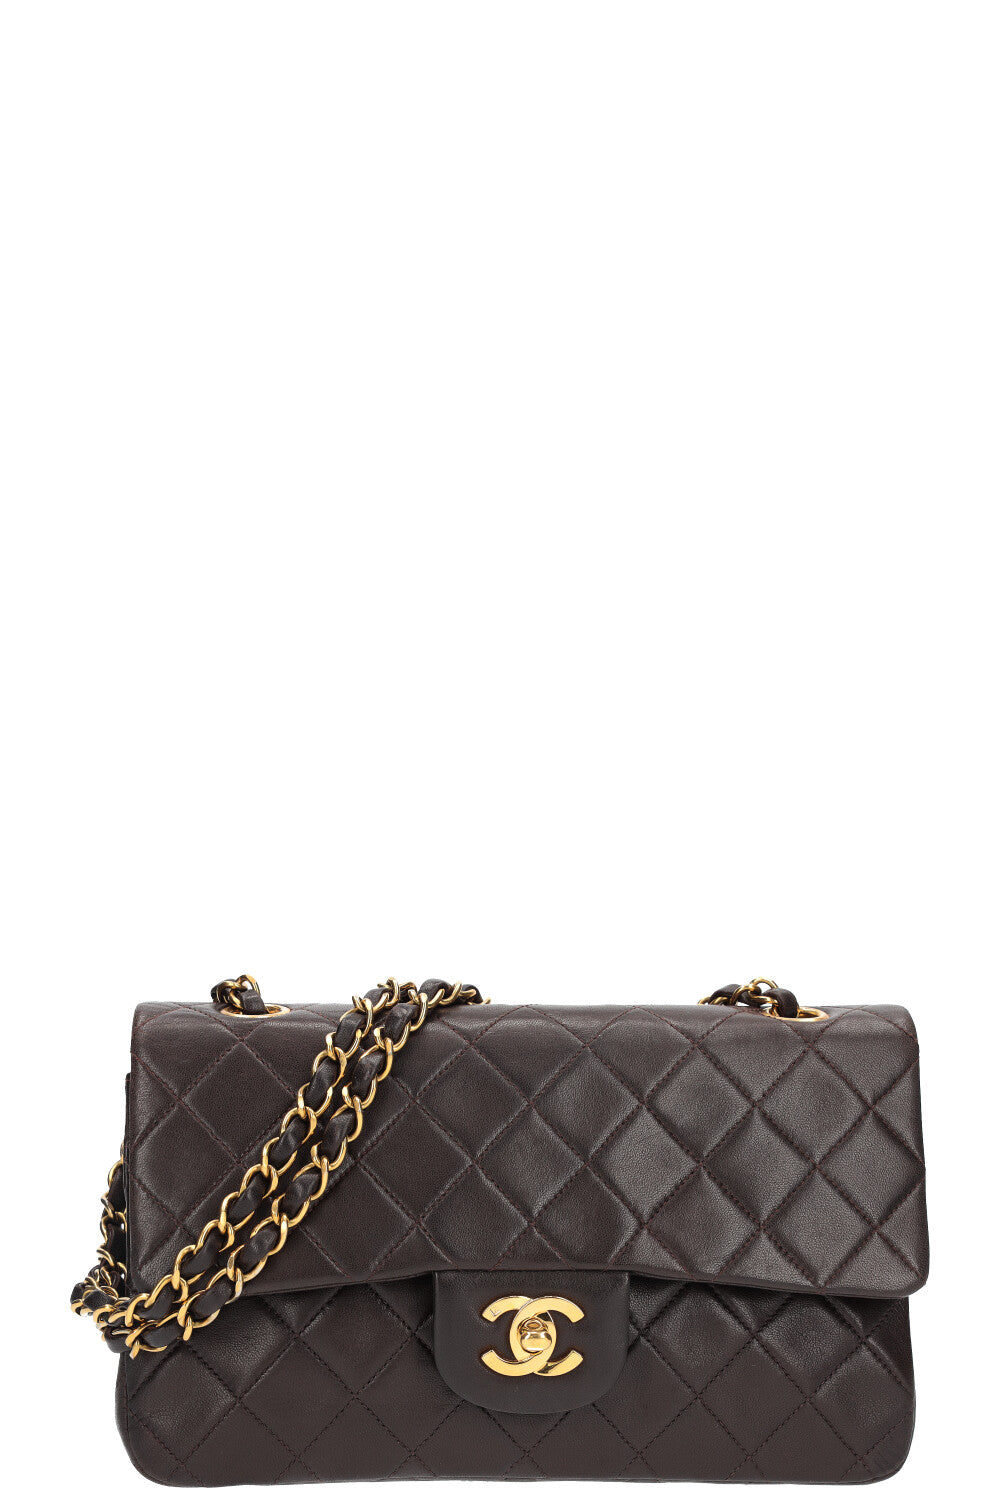 Chanel Double Flap Bag Brown Gold